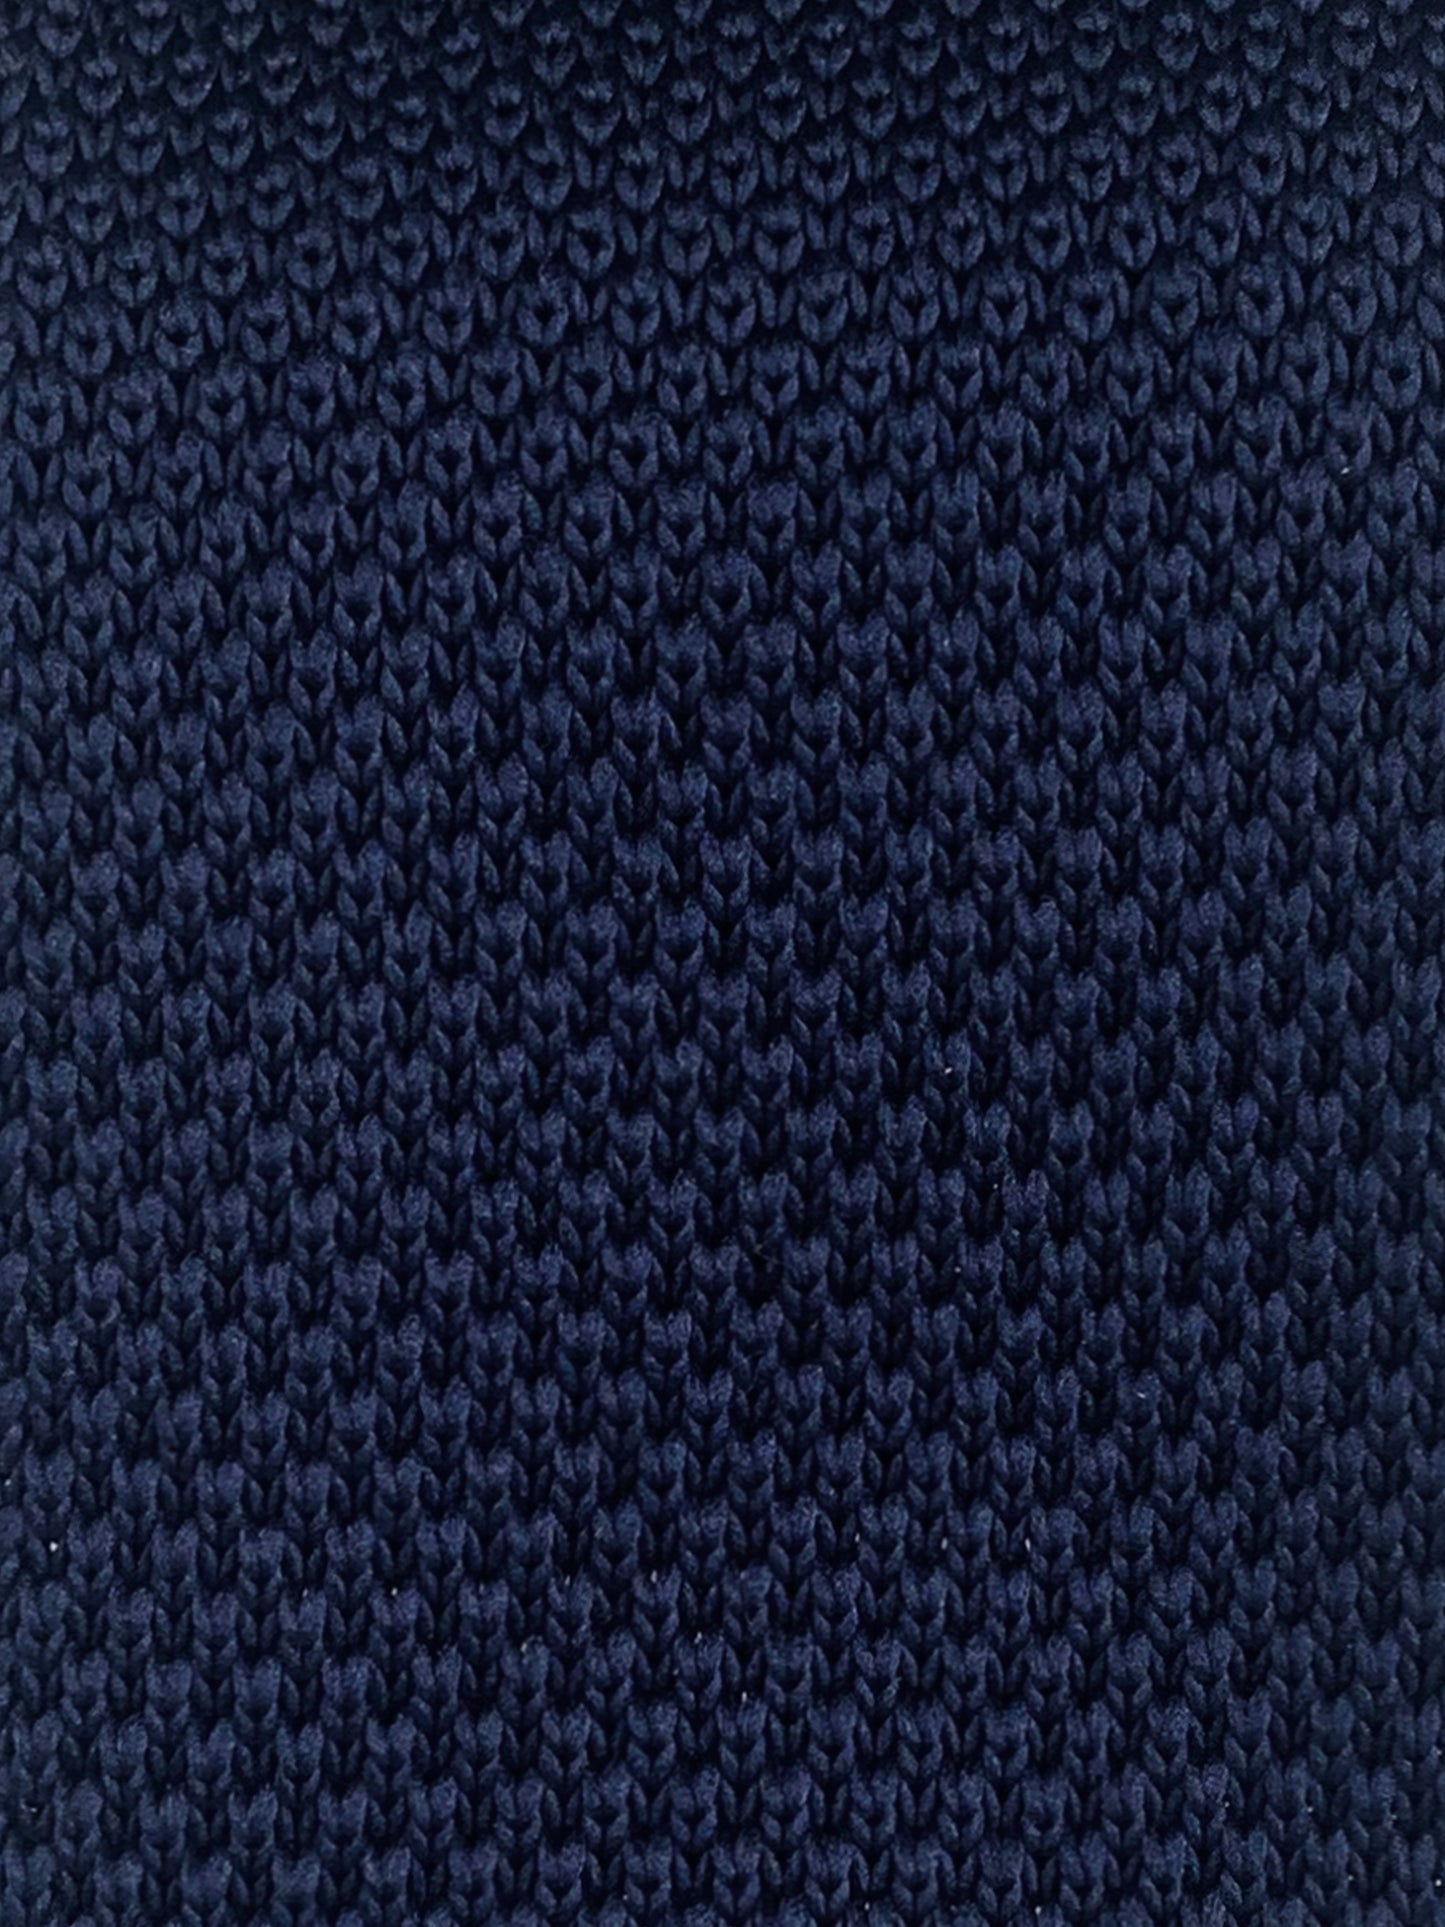 100% Polyester Square End Knitted Tie - Navy Blue